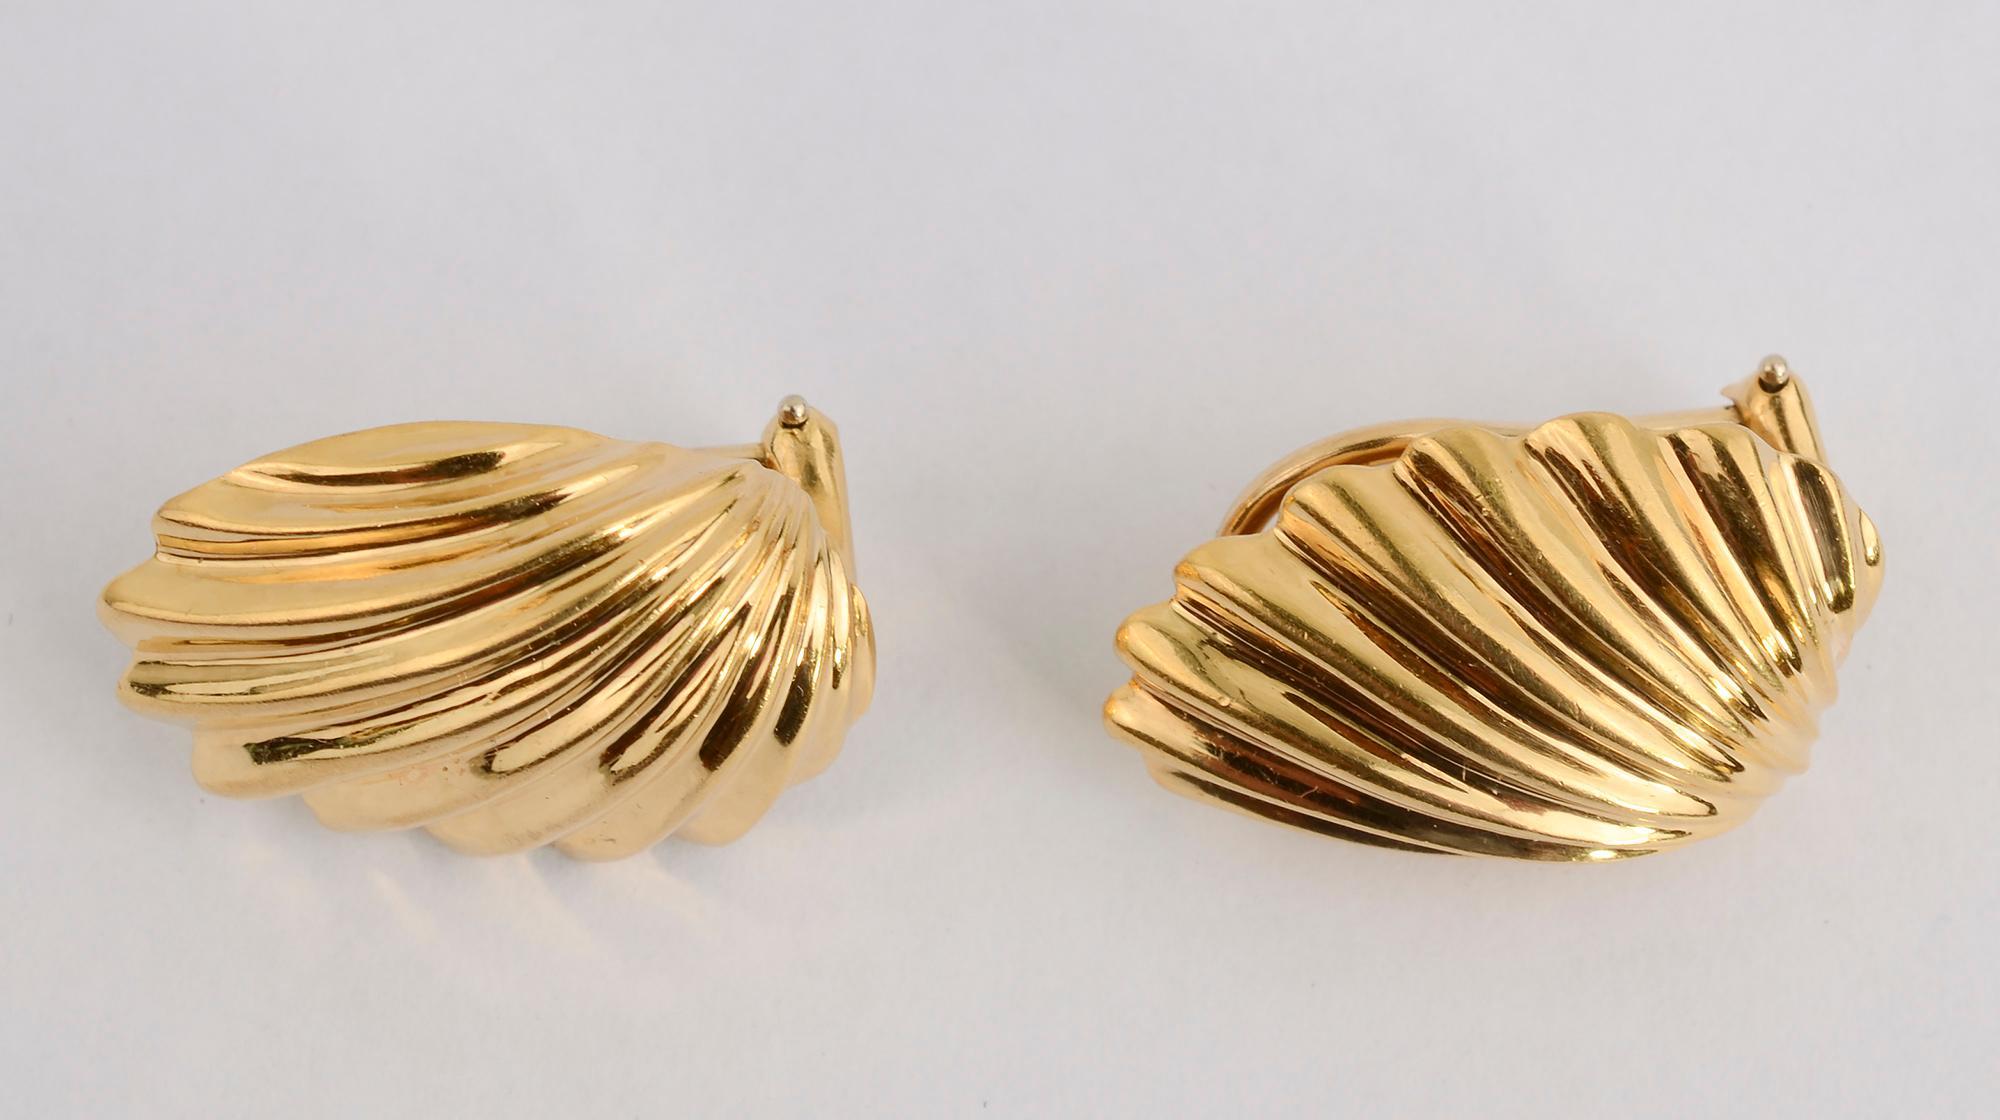 Eighteen karat gold shell earrings that are a bit unusual in that the shape is not symmetrical. One side is more flat than the other which allows it to sit well next to one's face. Backs are posts and clips which can easily be converted to posts